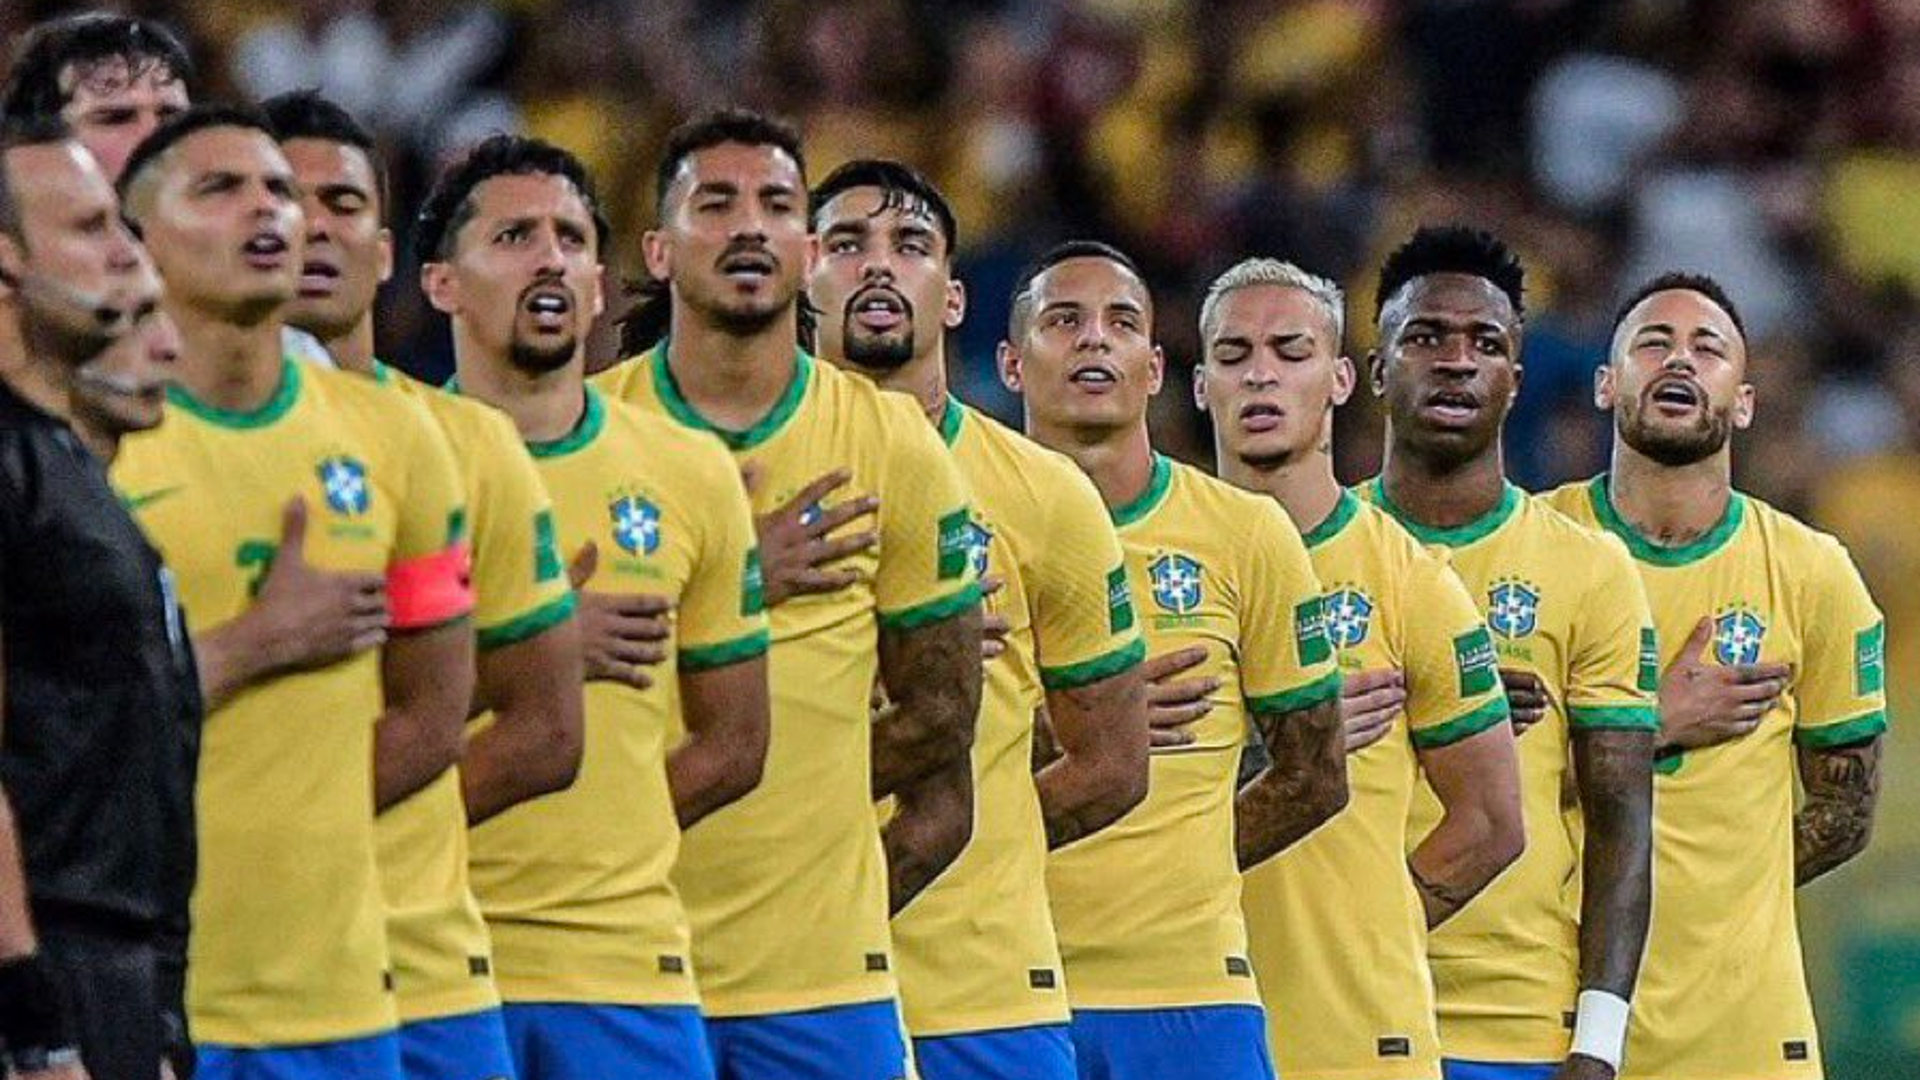 Brazilian Congress to oversee World Cup team. The Daily Star